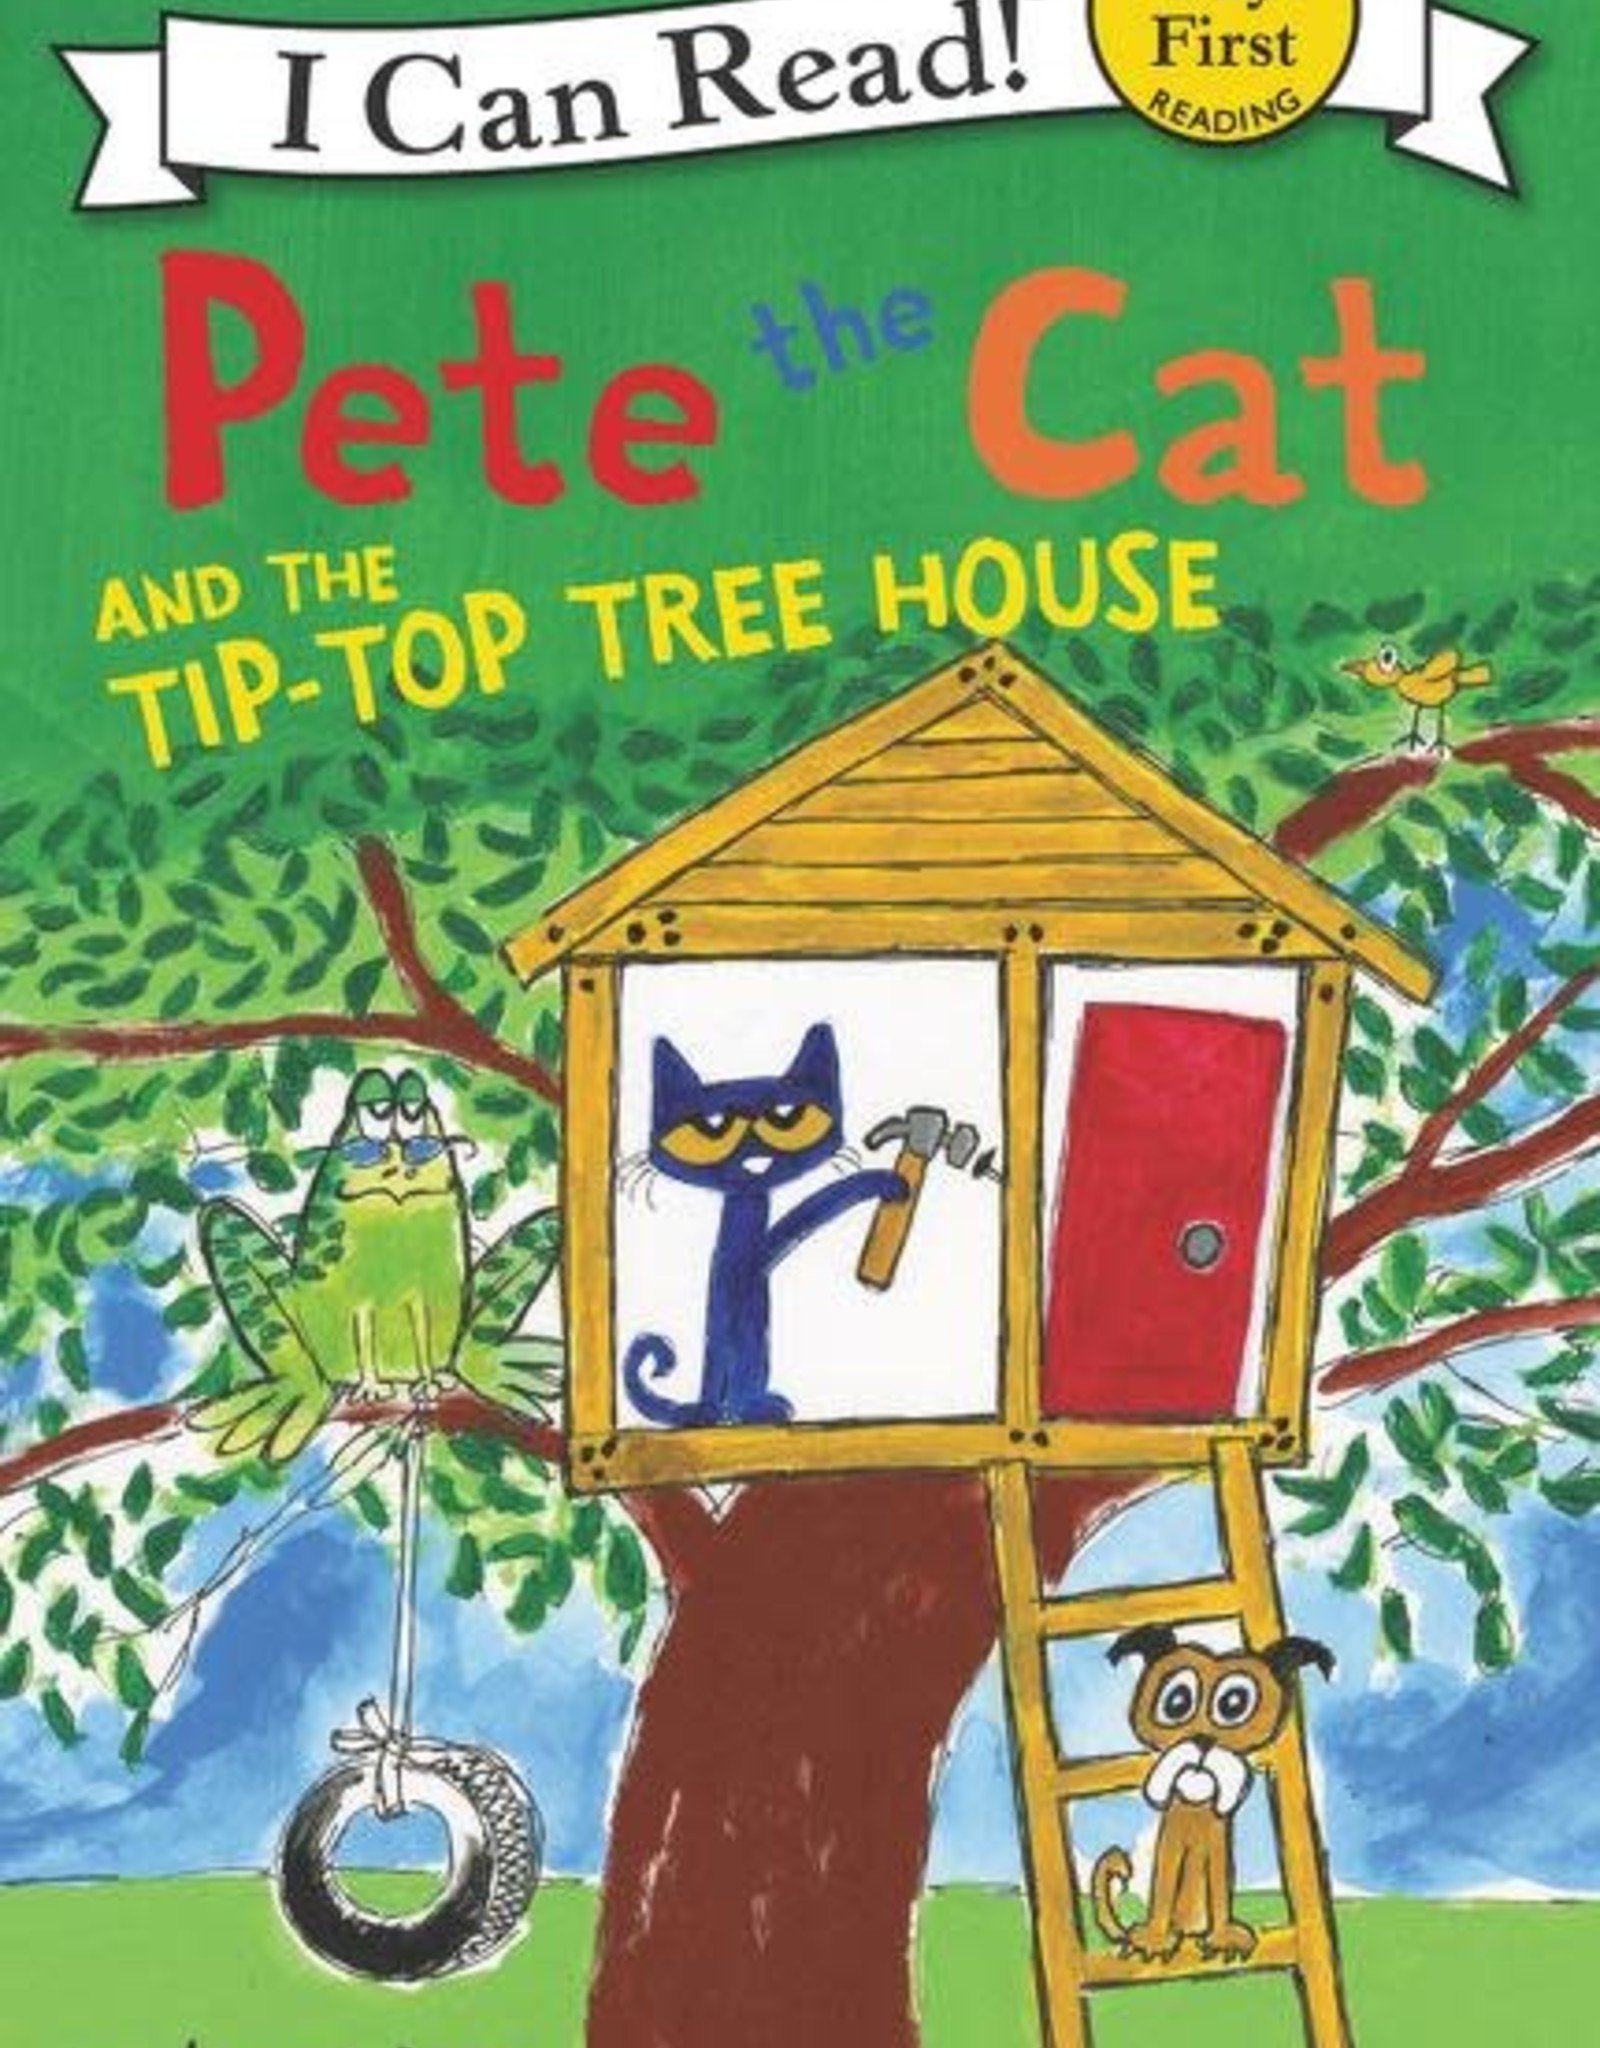 I Can Read! Pete the Cat and the Tip-Top Tree House